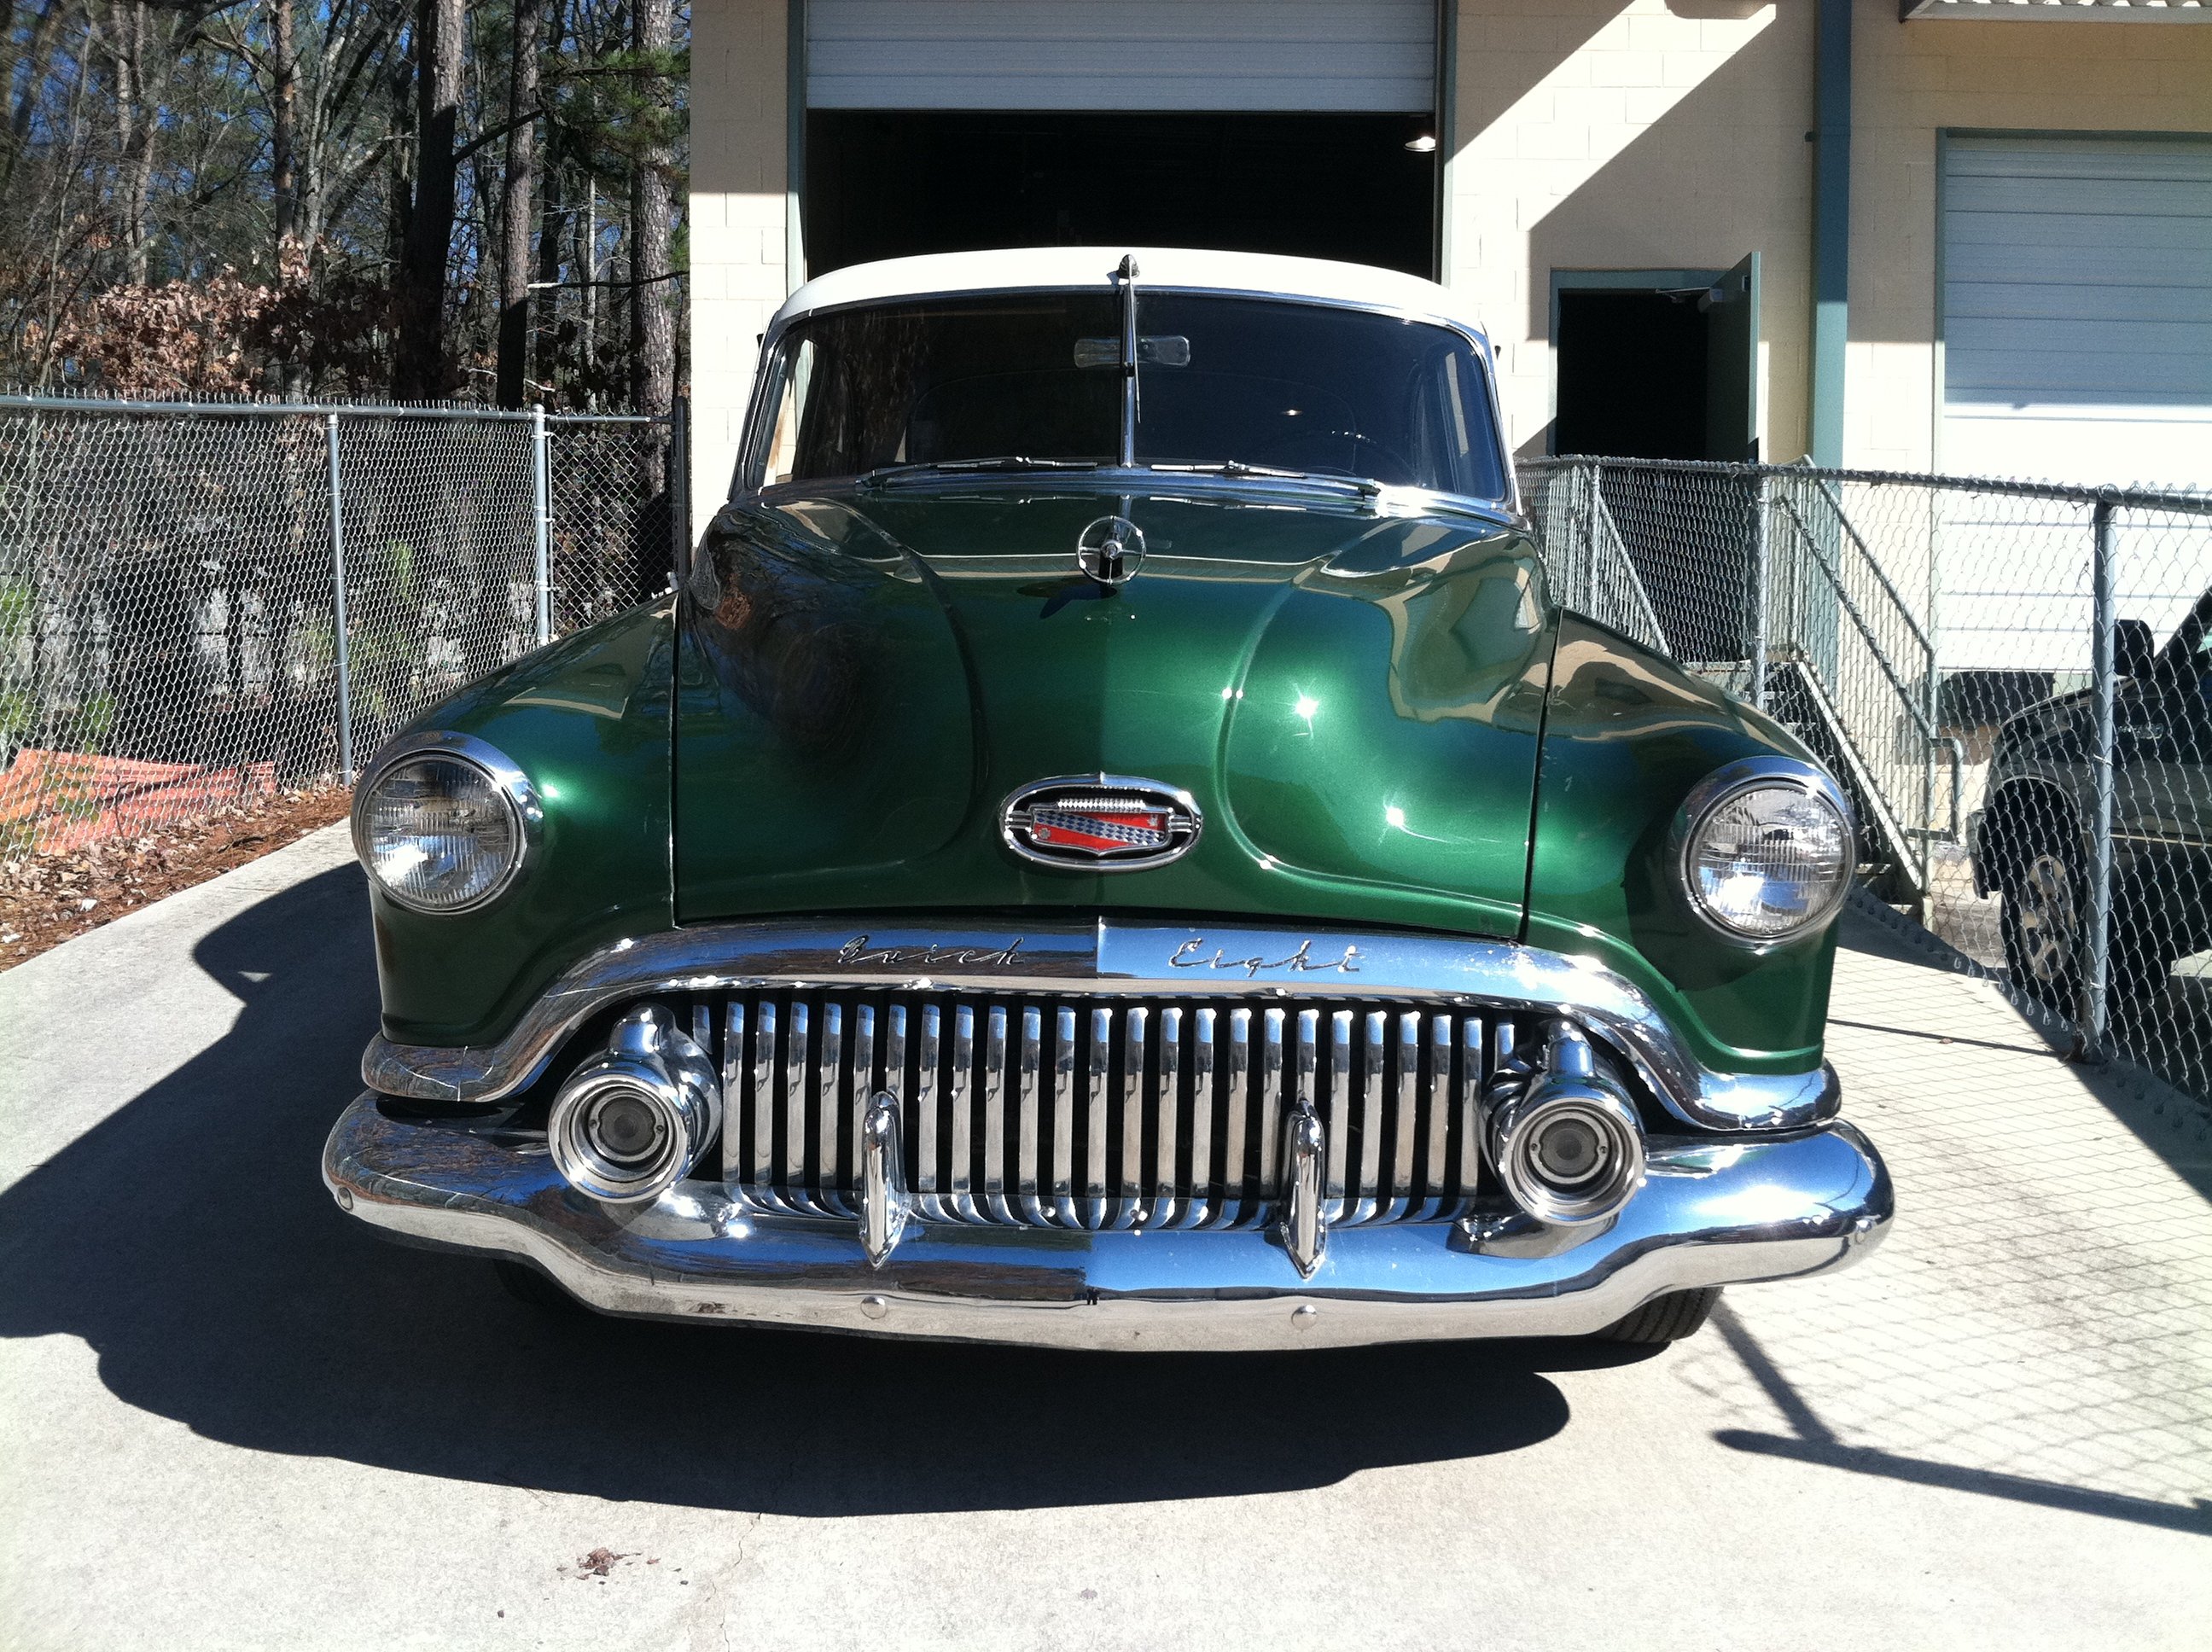 1951, Buick, Eight, Coupe, Special, Classic, Old, Vintage, Usa, 2592x1936 12 Wallpaper